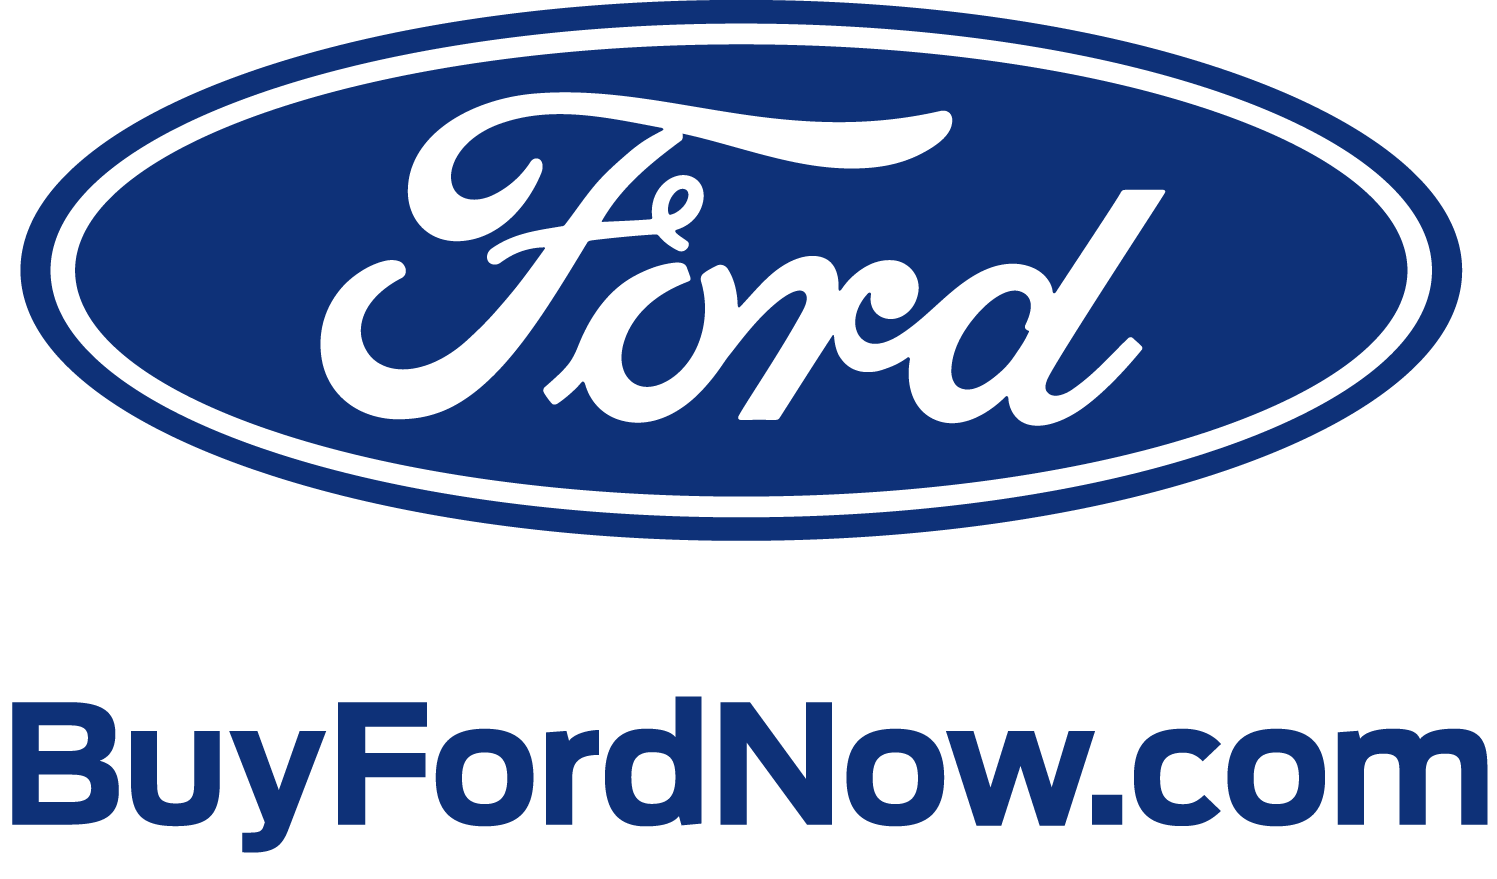 “ford”